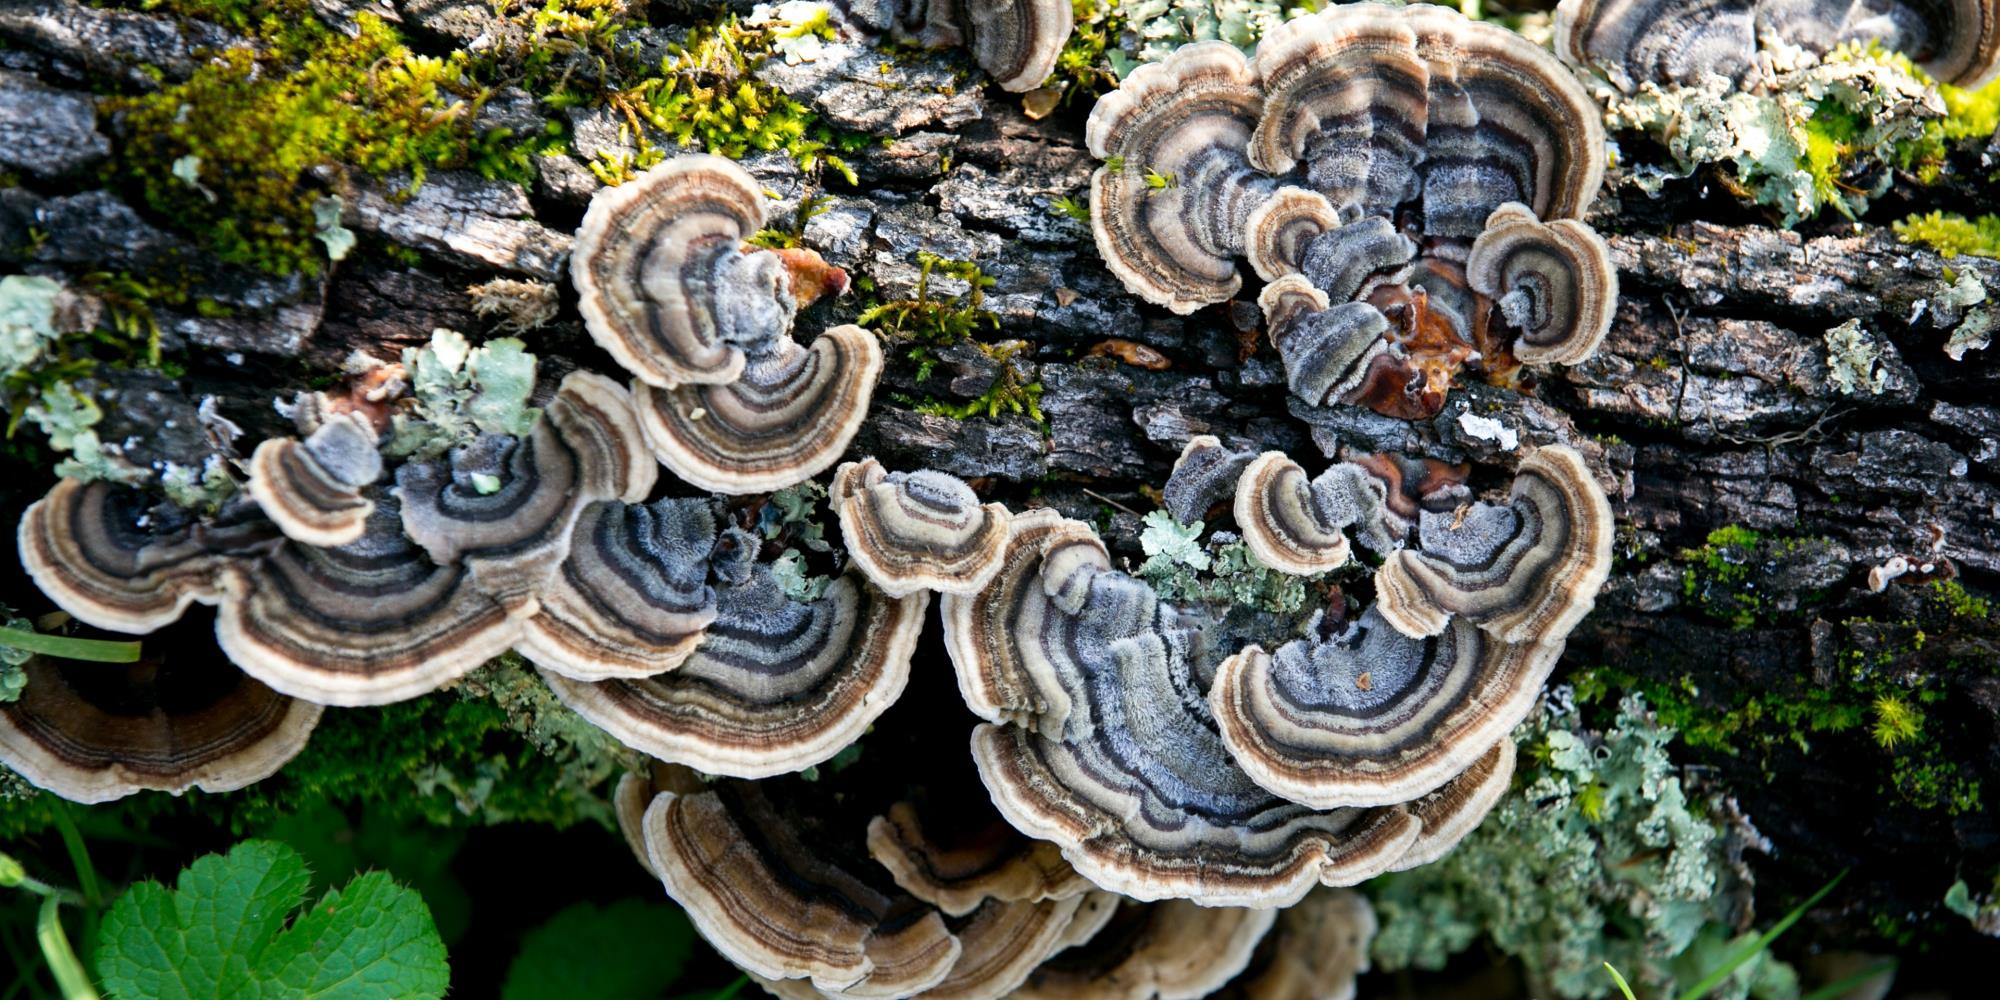 3 Immune Boosting Medicinal Mushrooms You Can Forage in New Jersey